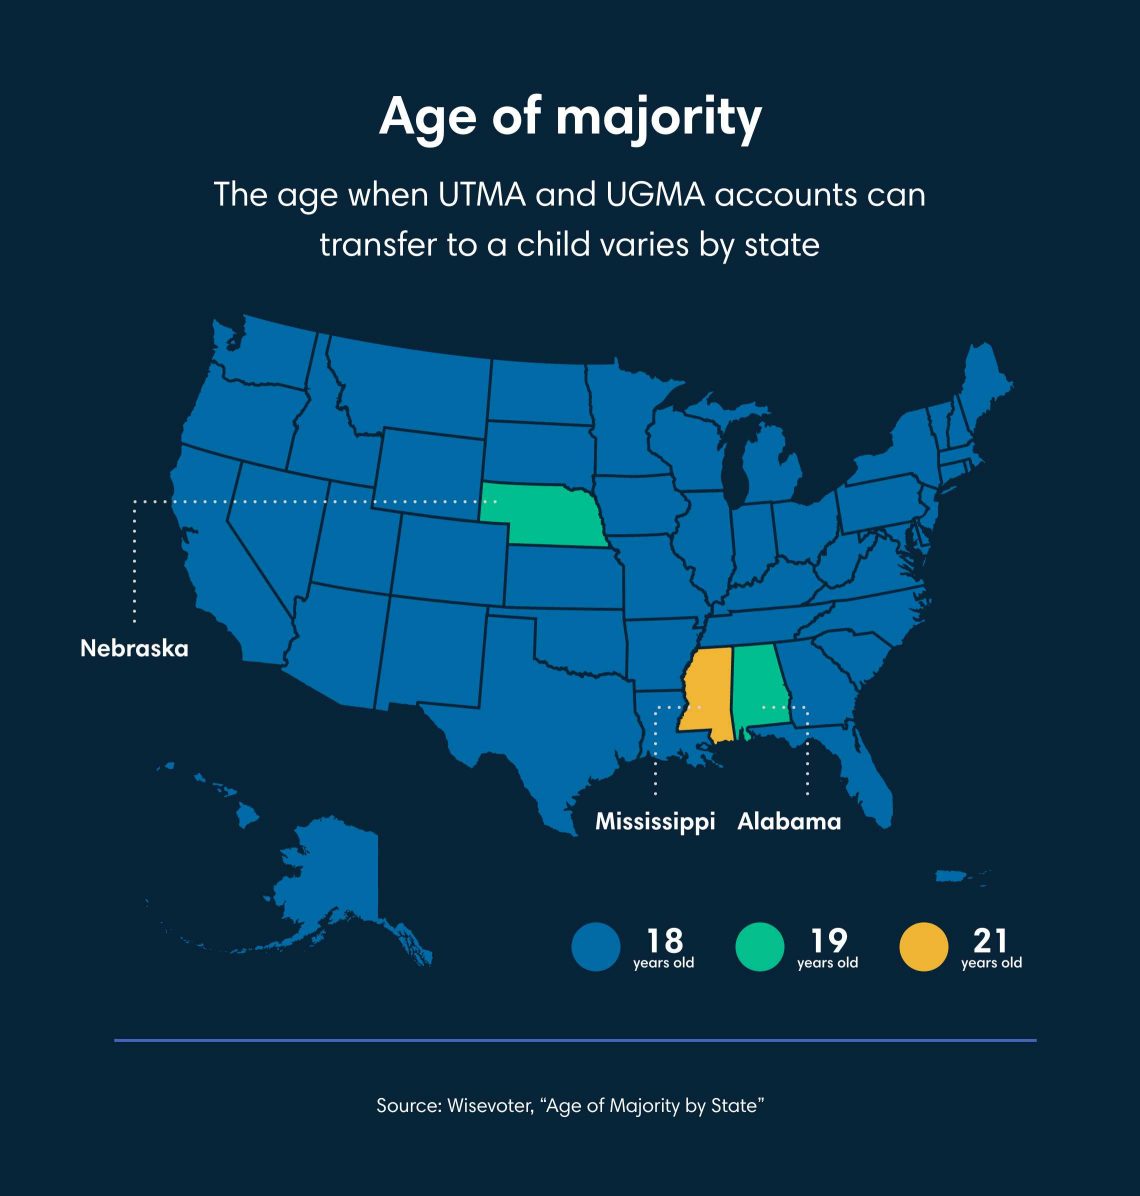 Micrographic showing the age at which UTMA and UGMA accounts can transfer to a child by state